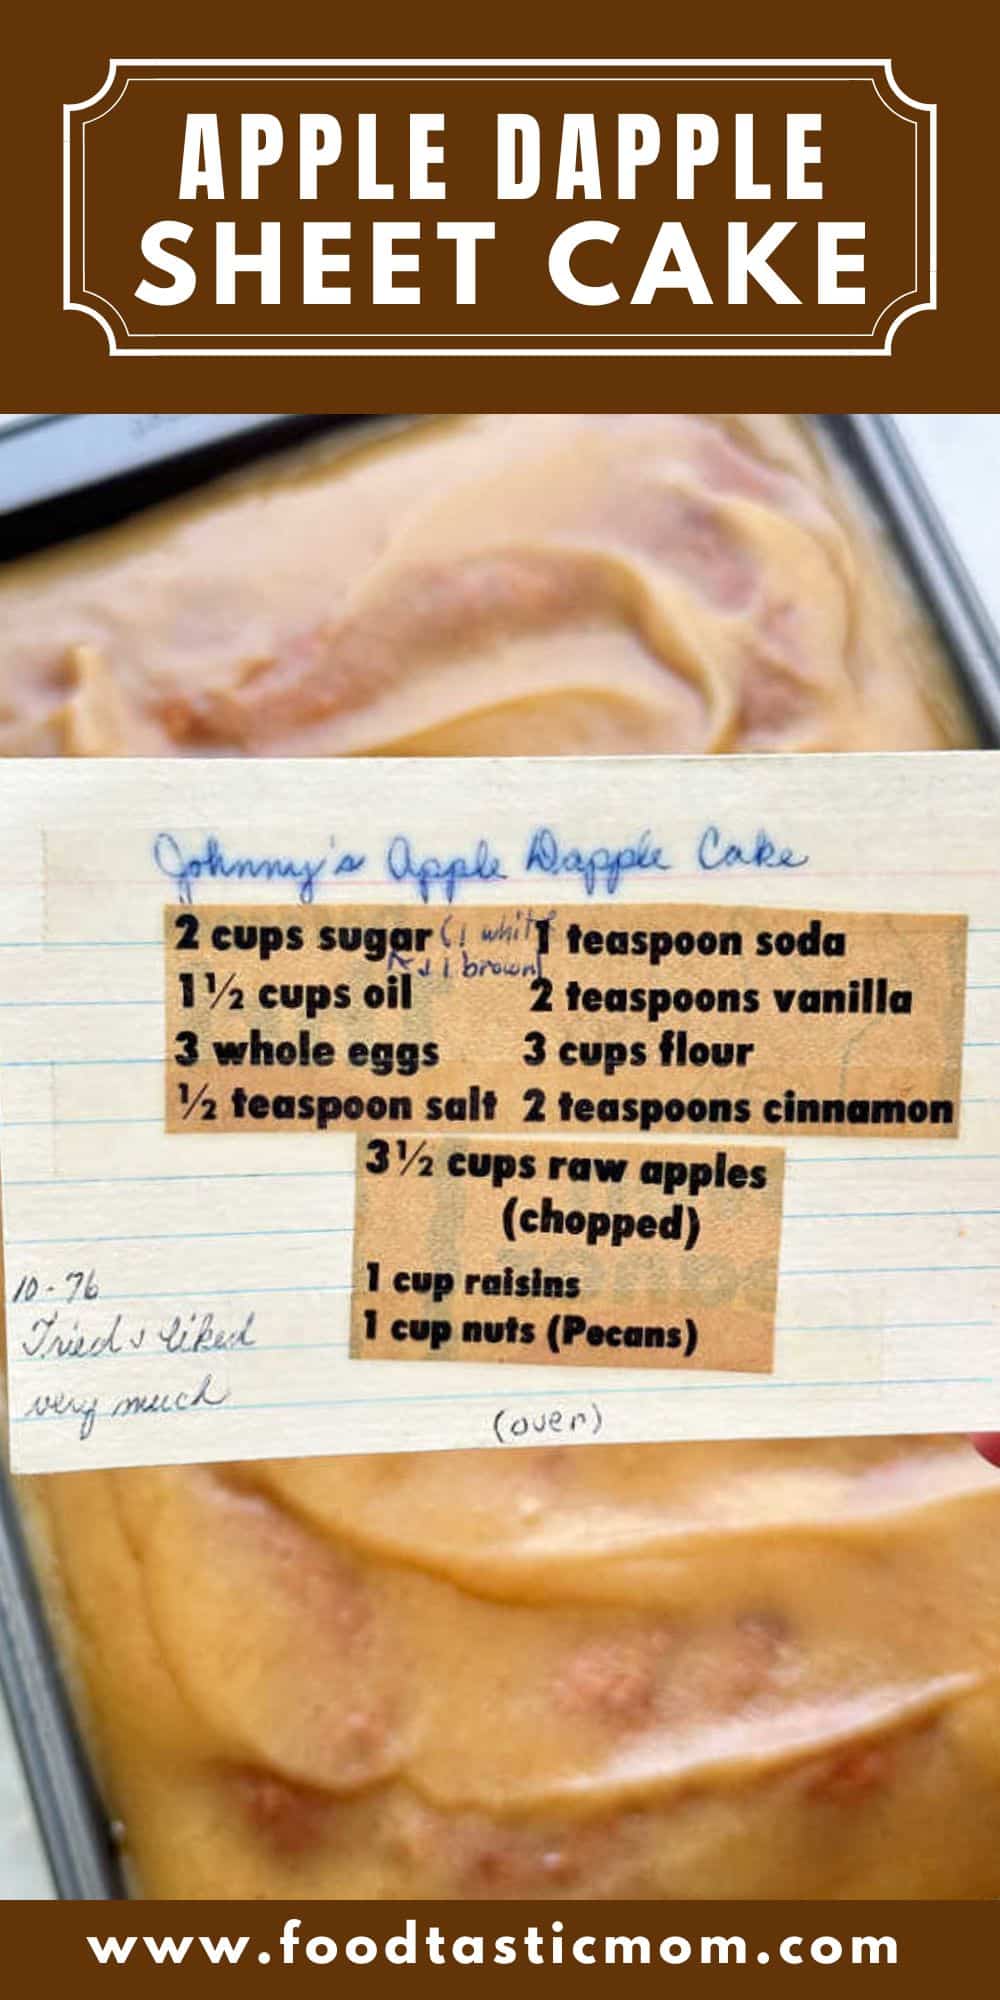 This easy apple dapple cake recipe is one of my most favorite vintage recipes from my Mom's handwritten recipe card collection. It's a classic cake filled with fresh apples and warm fall spices. via @foodtasticmom